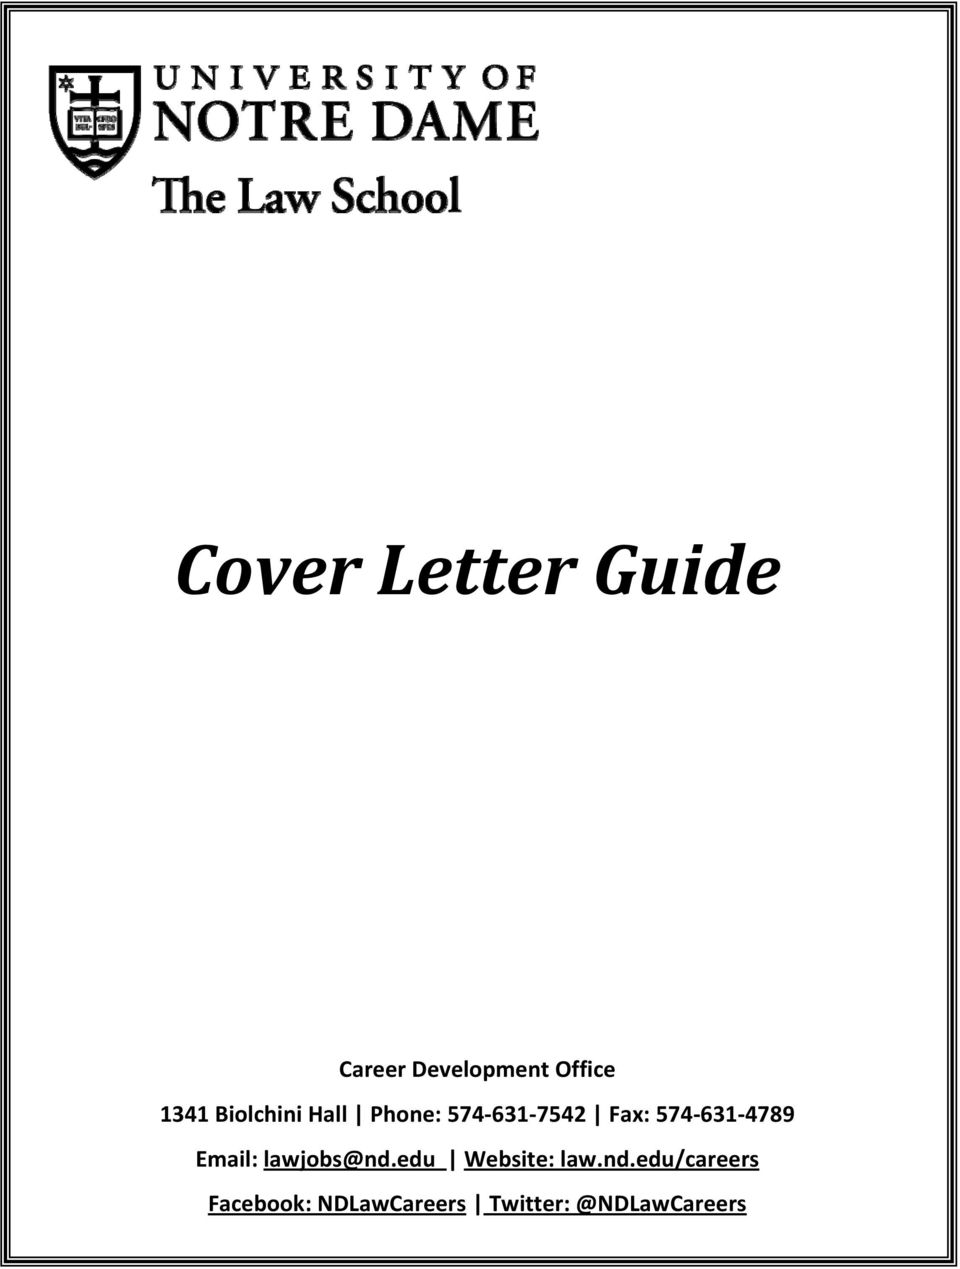 4789 Email: lawjobs@nd.